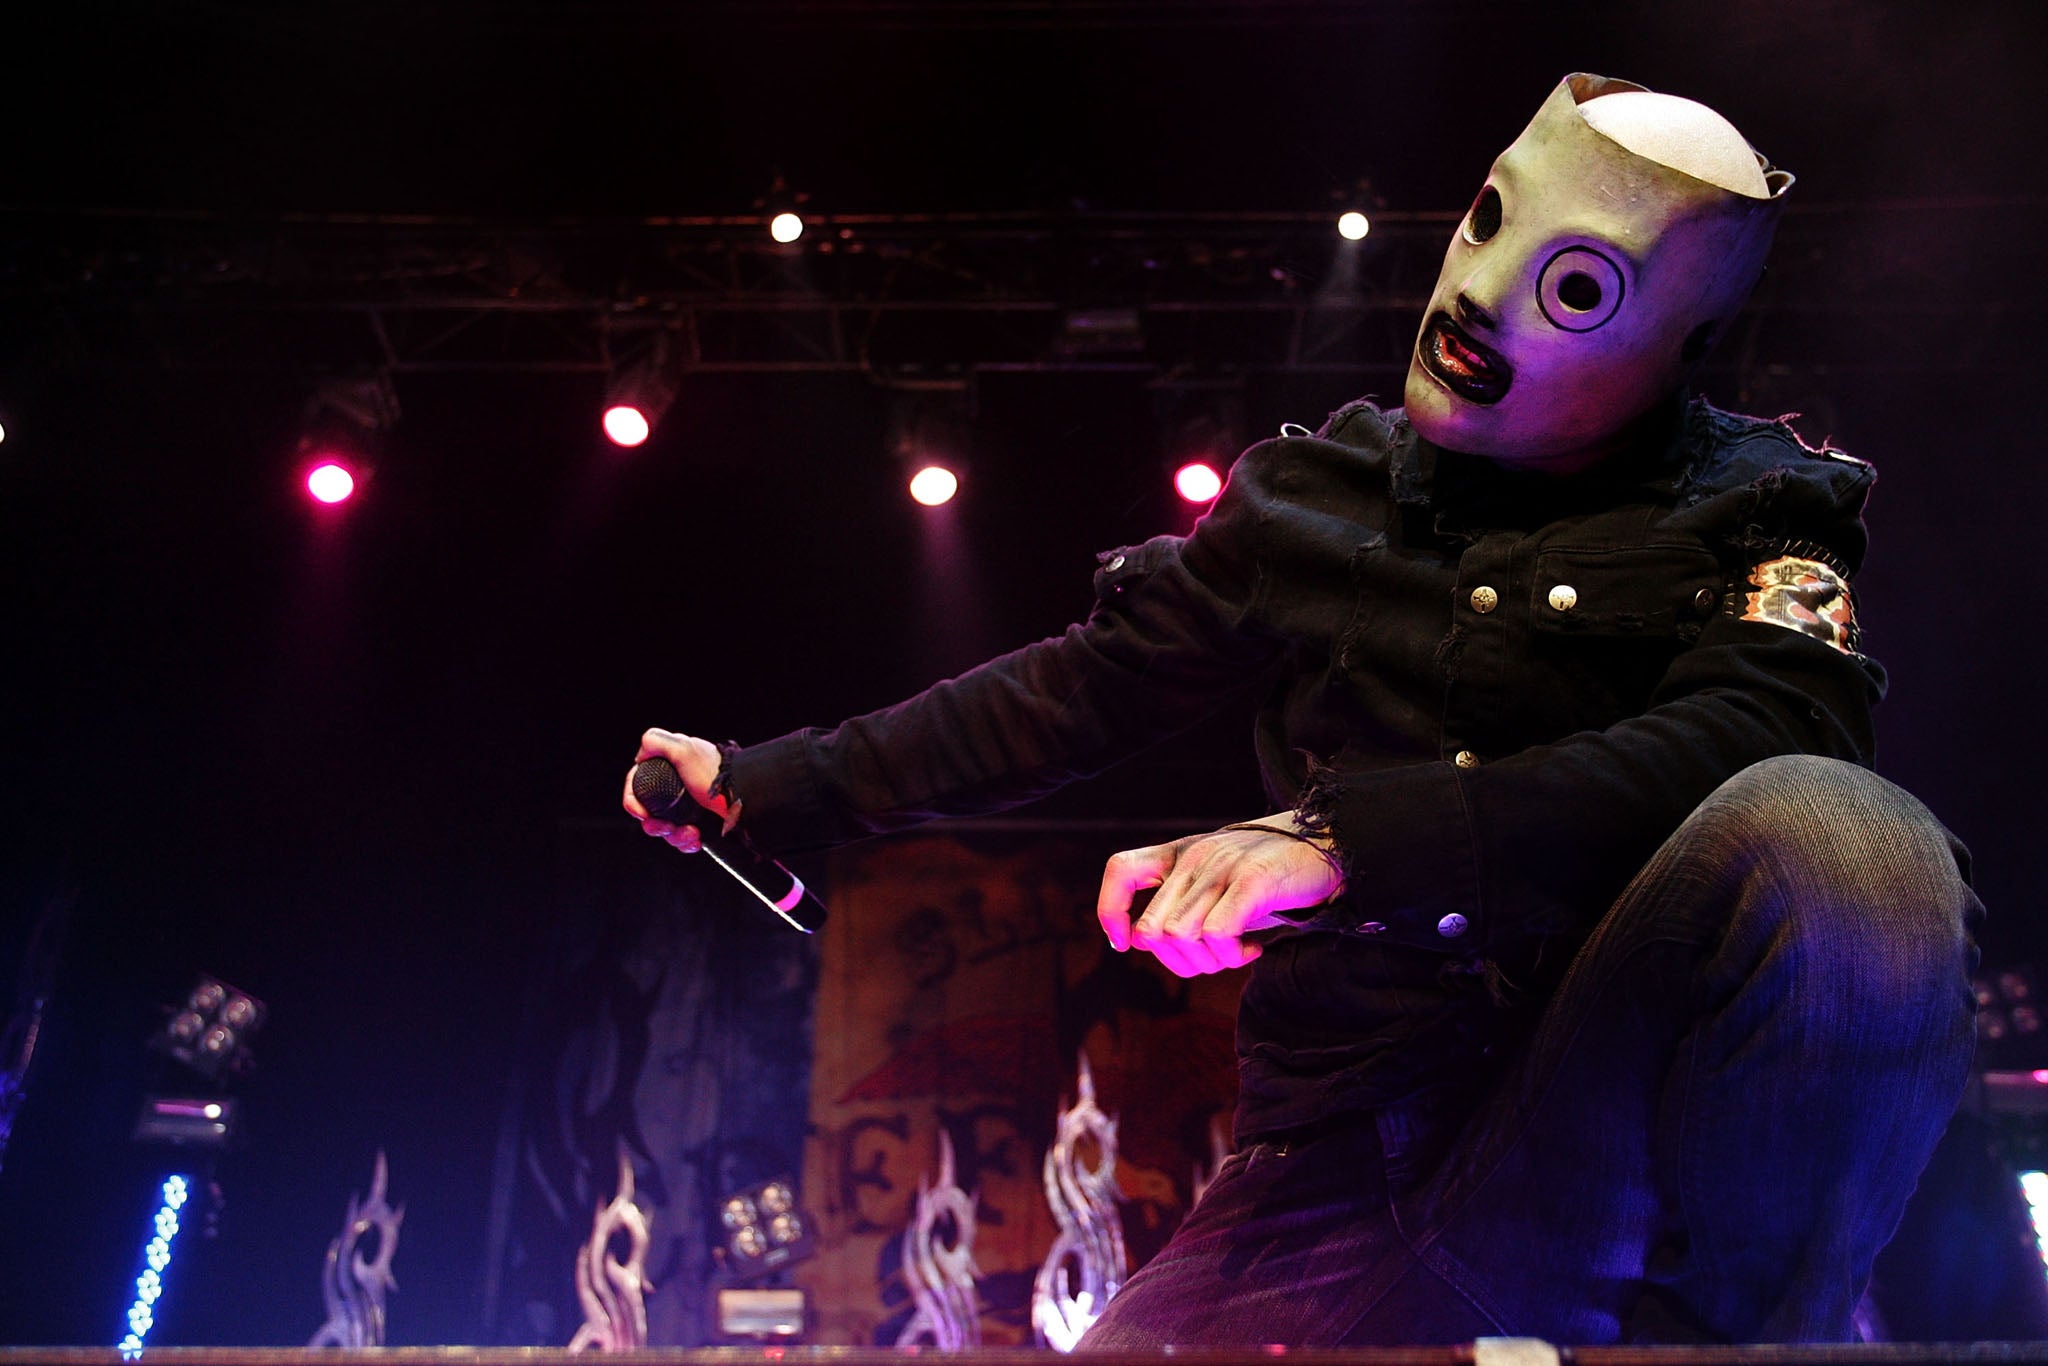 Corey Taylor of Slipknot performs on stage in Sydney